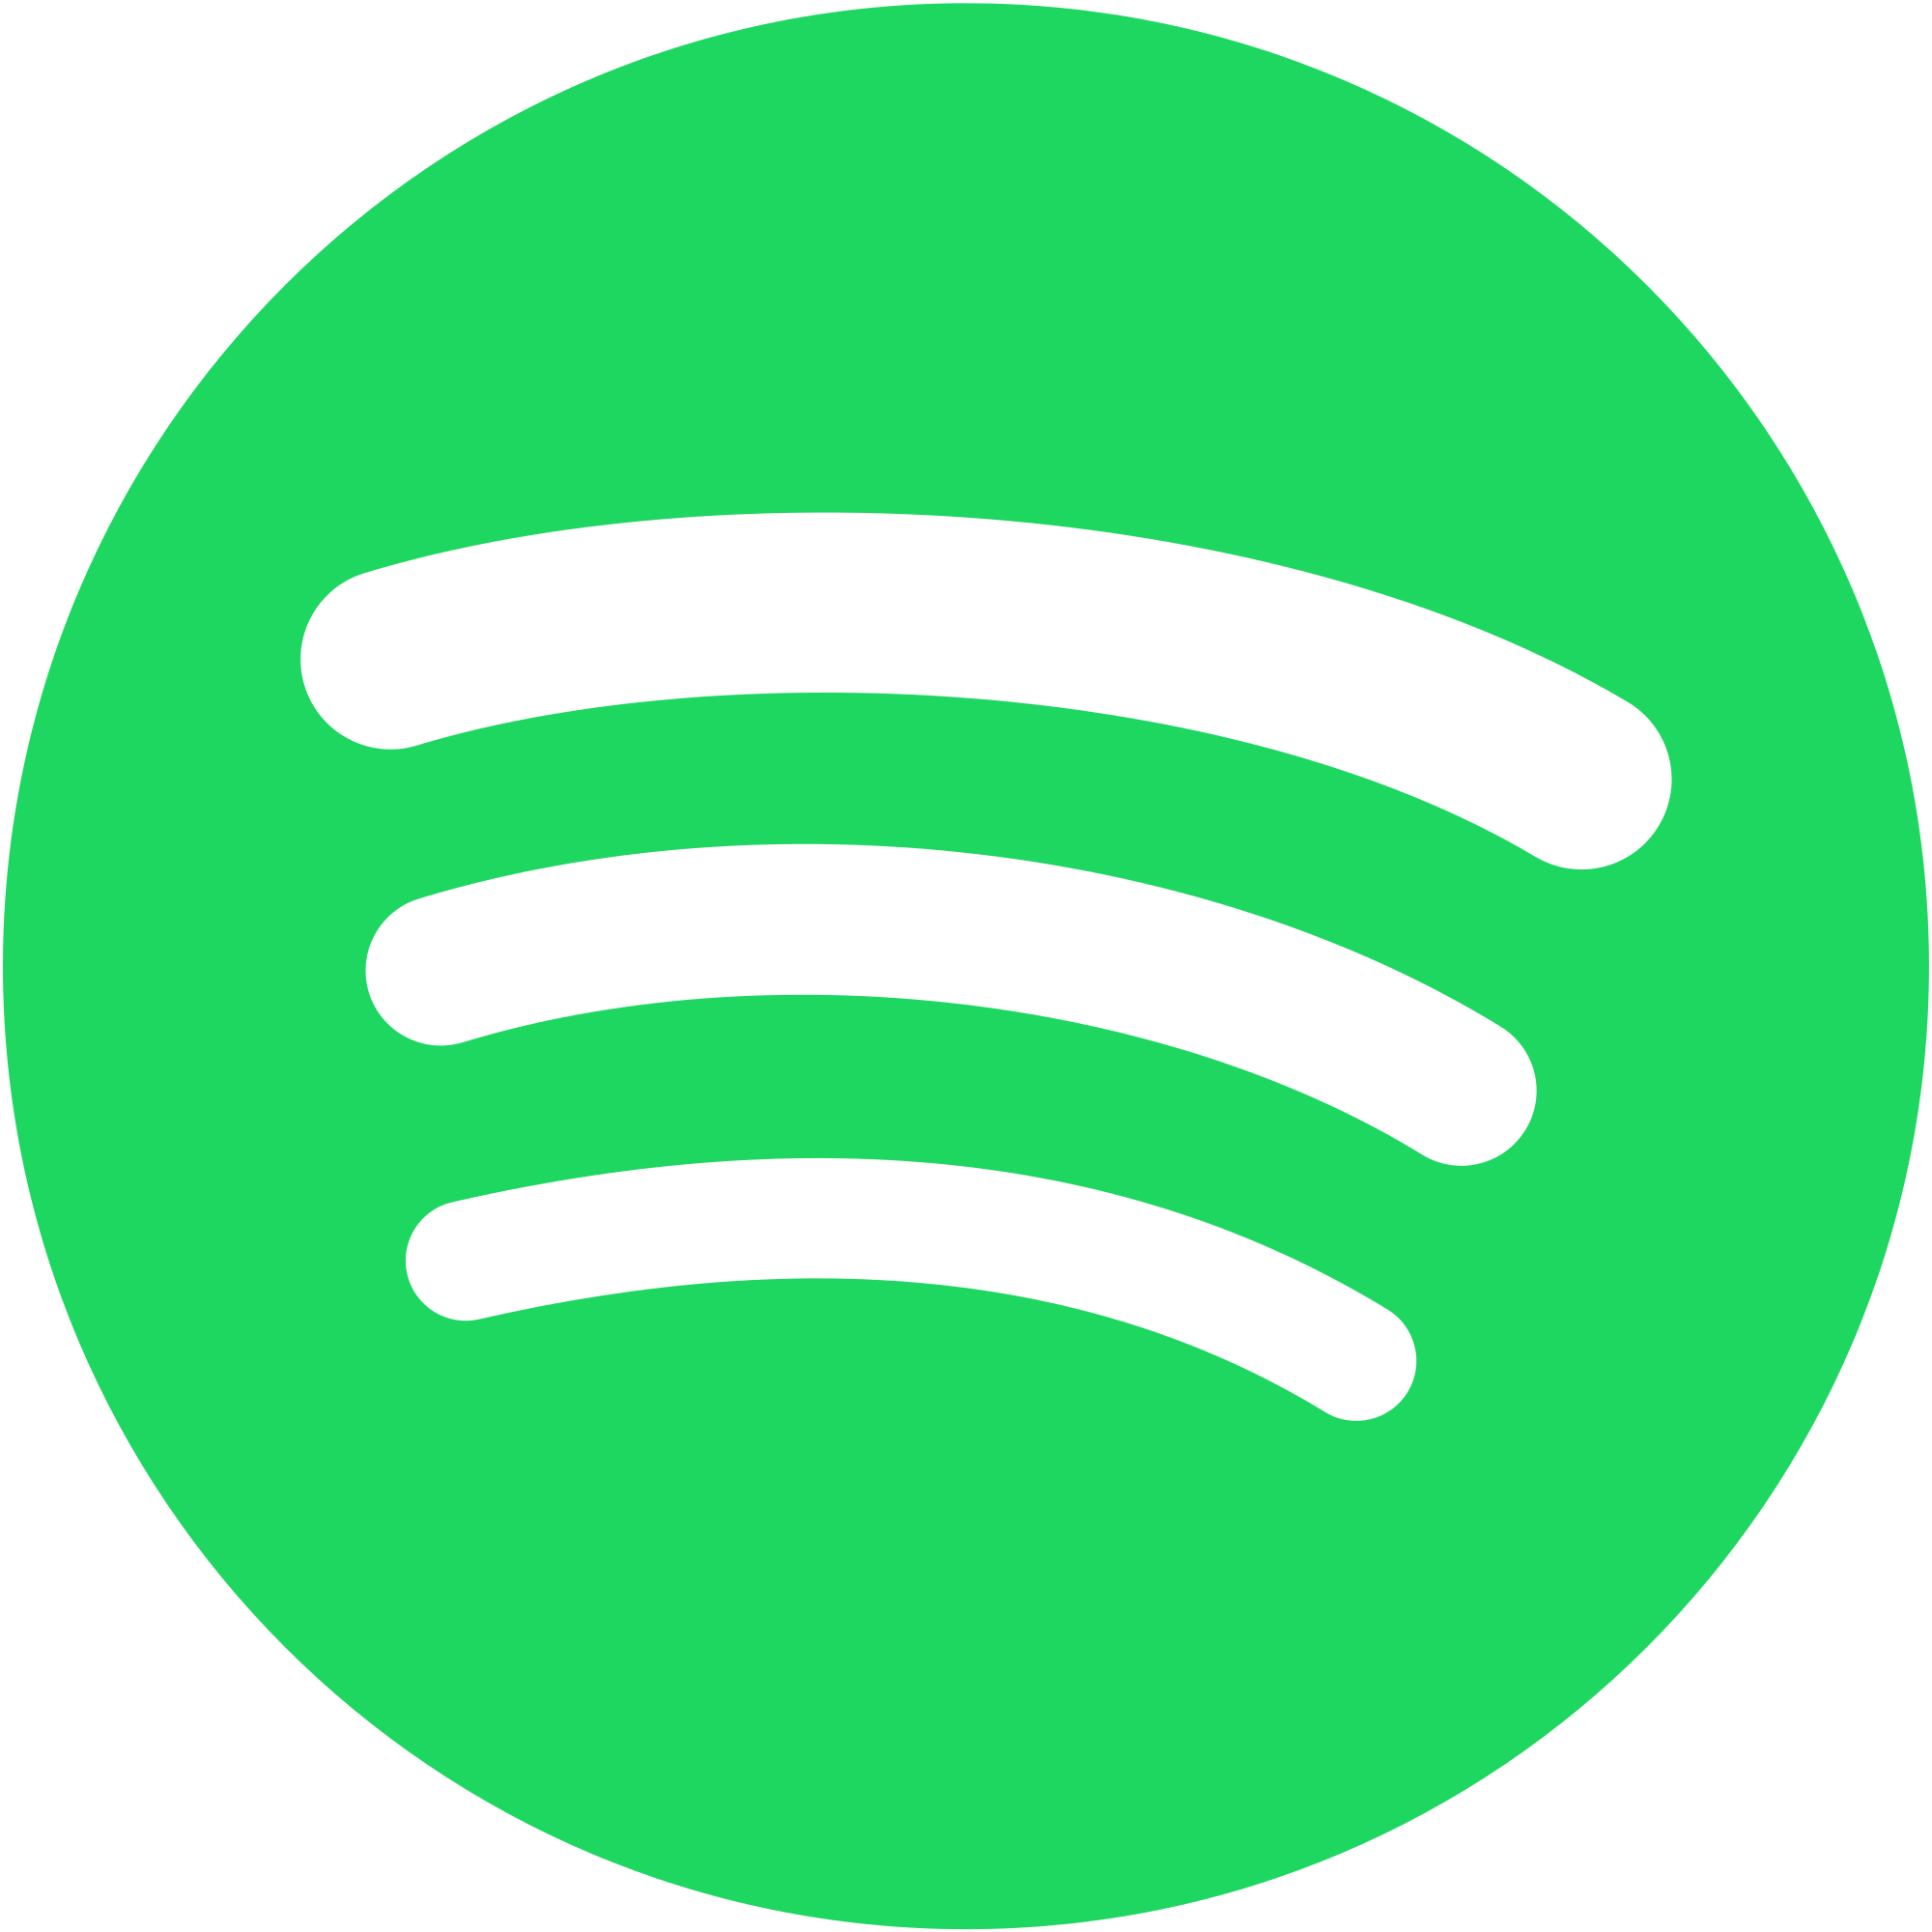 Spotify_logo_without_text.png